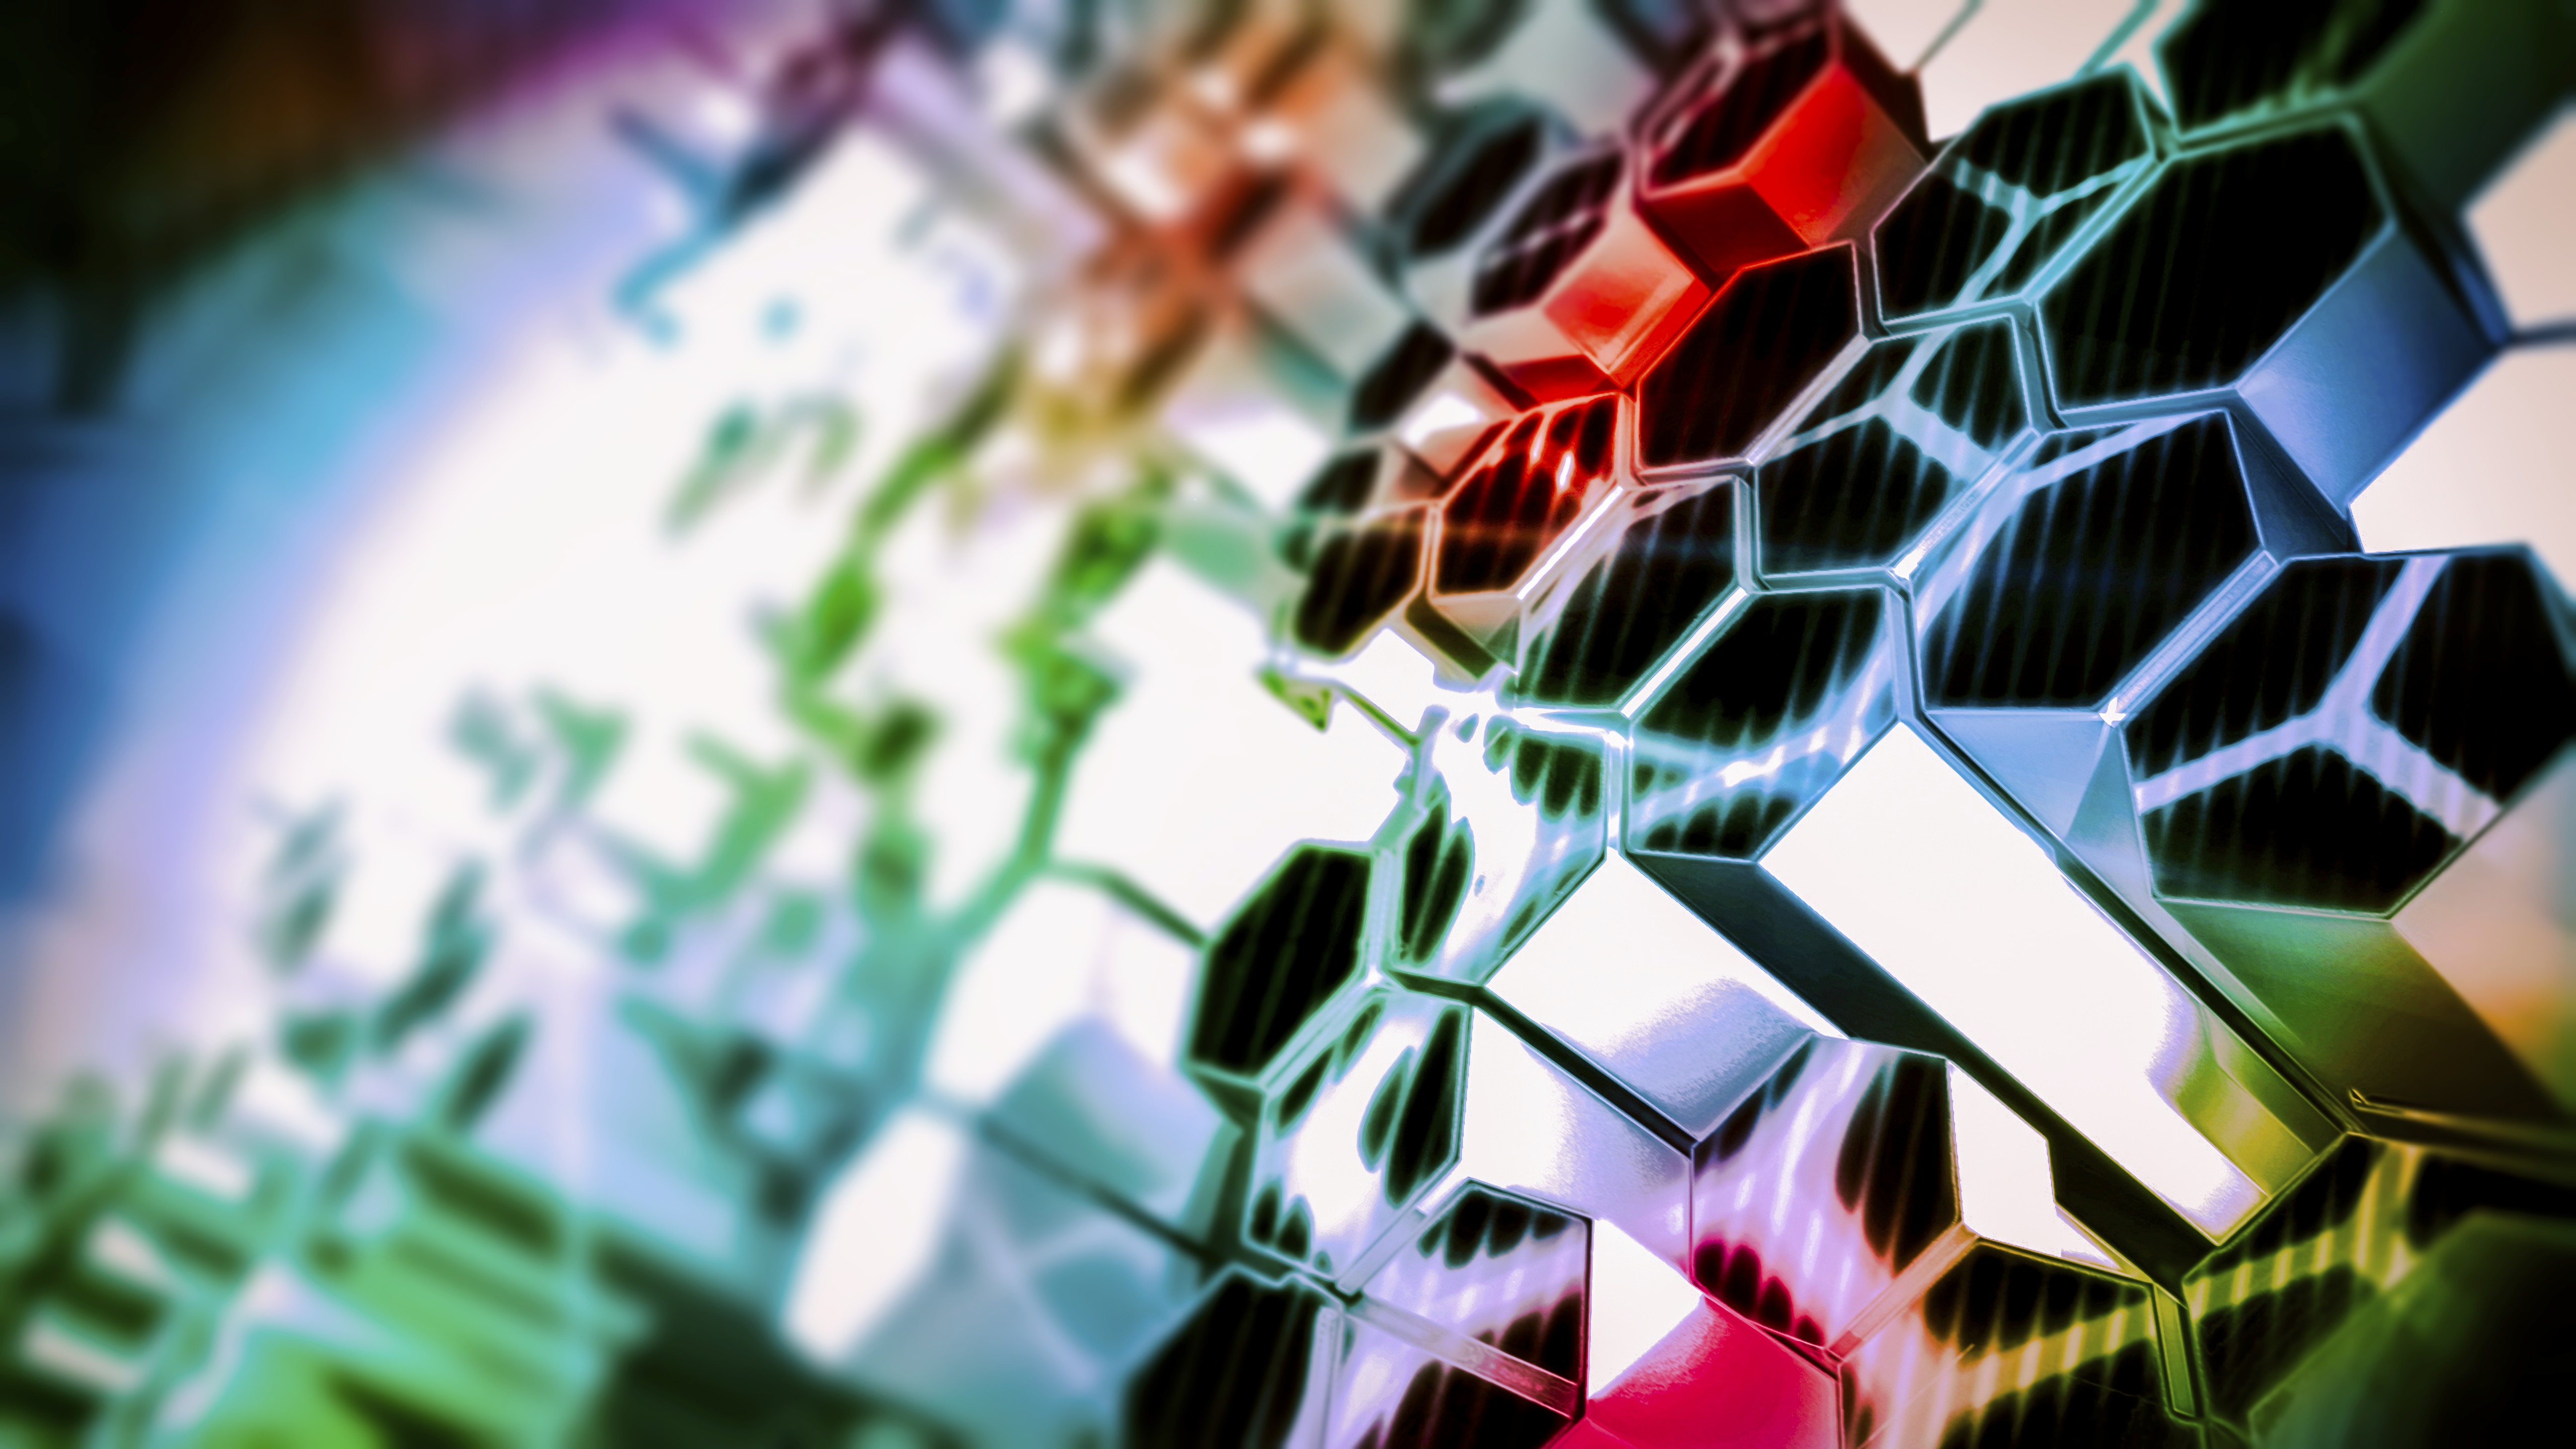 multicolored, shine, structure, motley, abstract, glare, light, hexagons, hexagonals